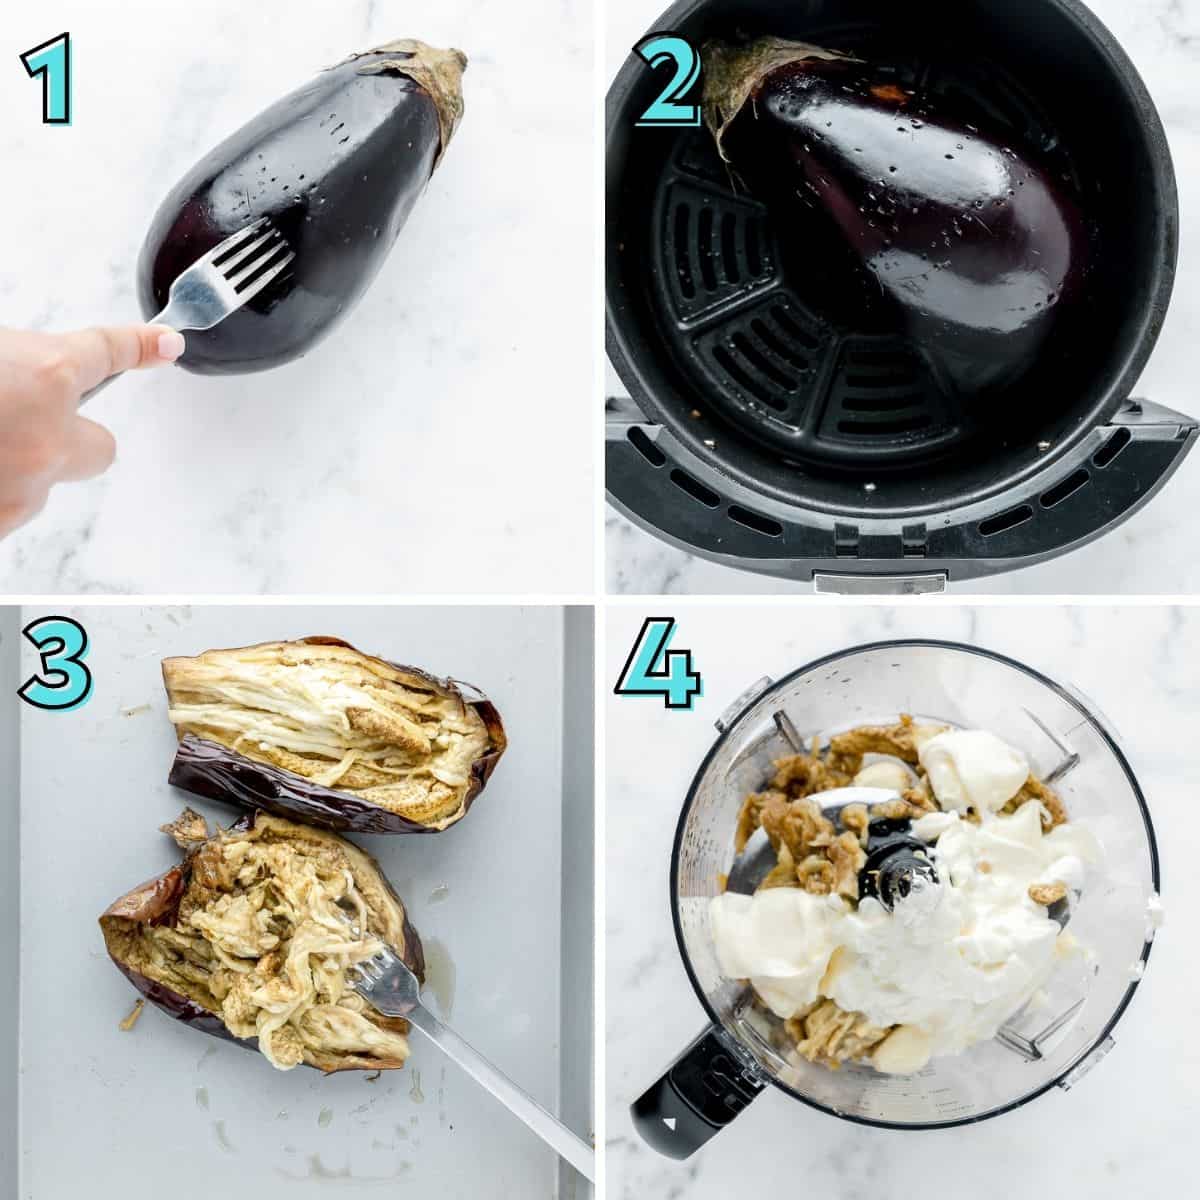 Step by step instructions to prepare roasted eggplant dip, in a collage.